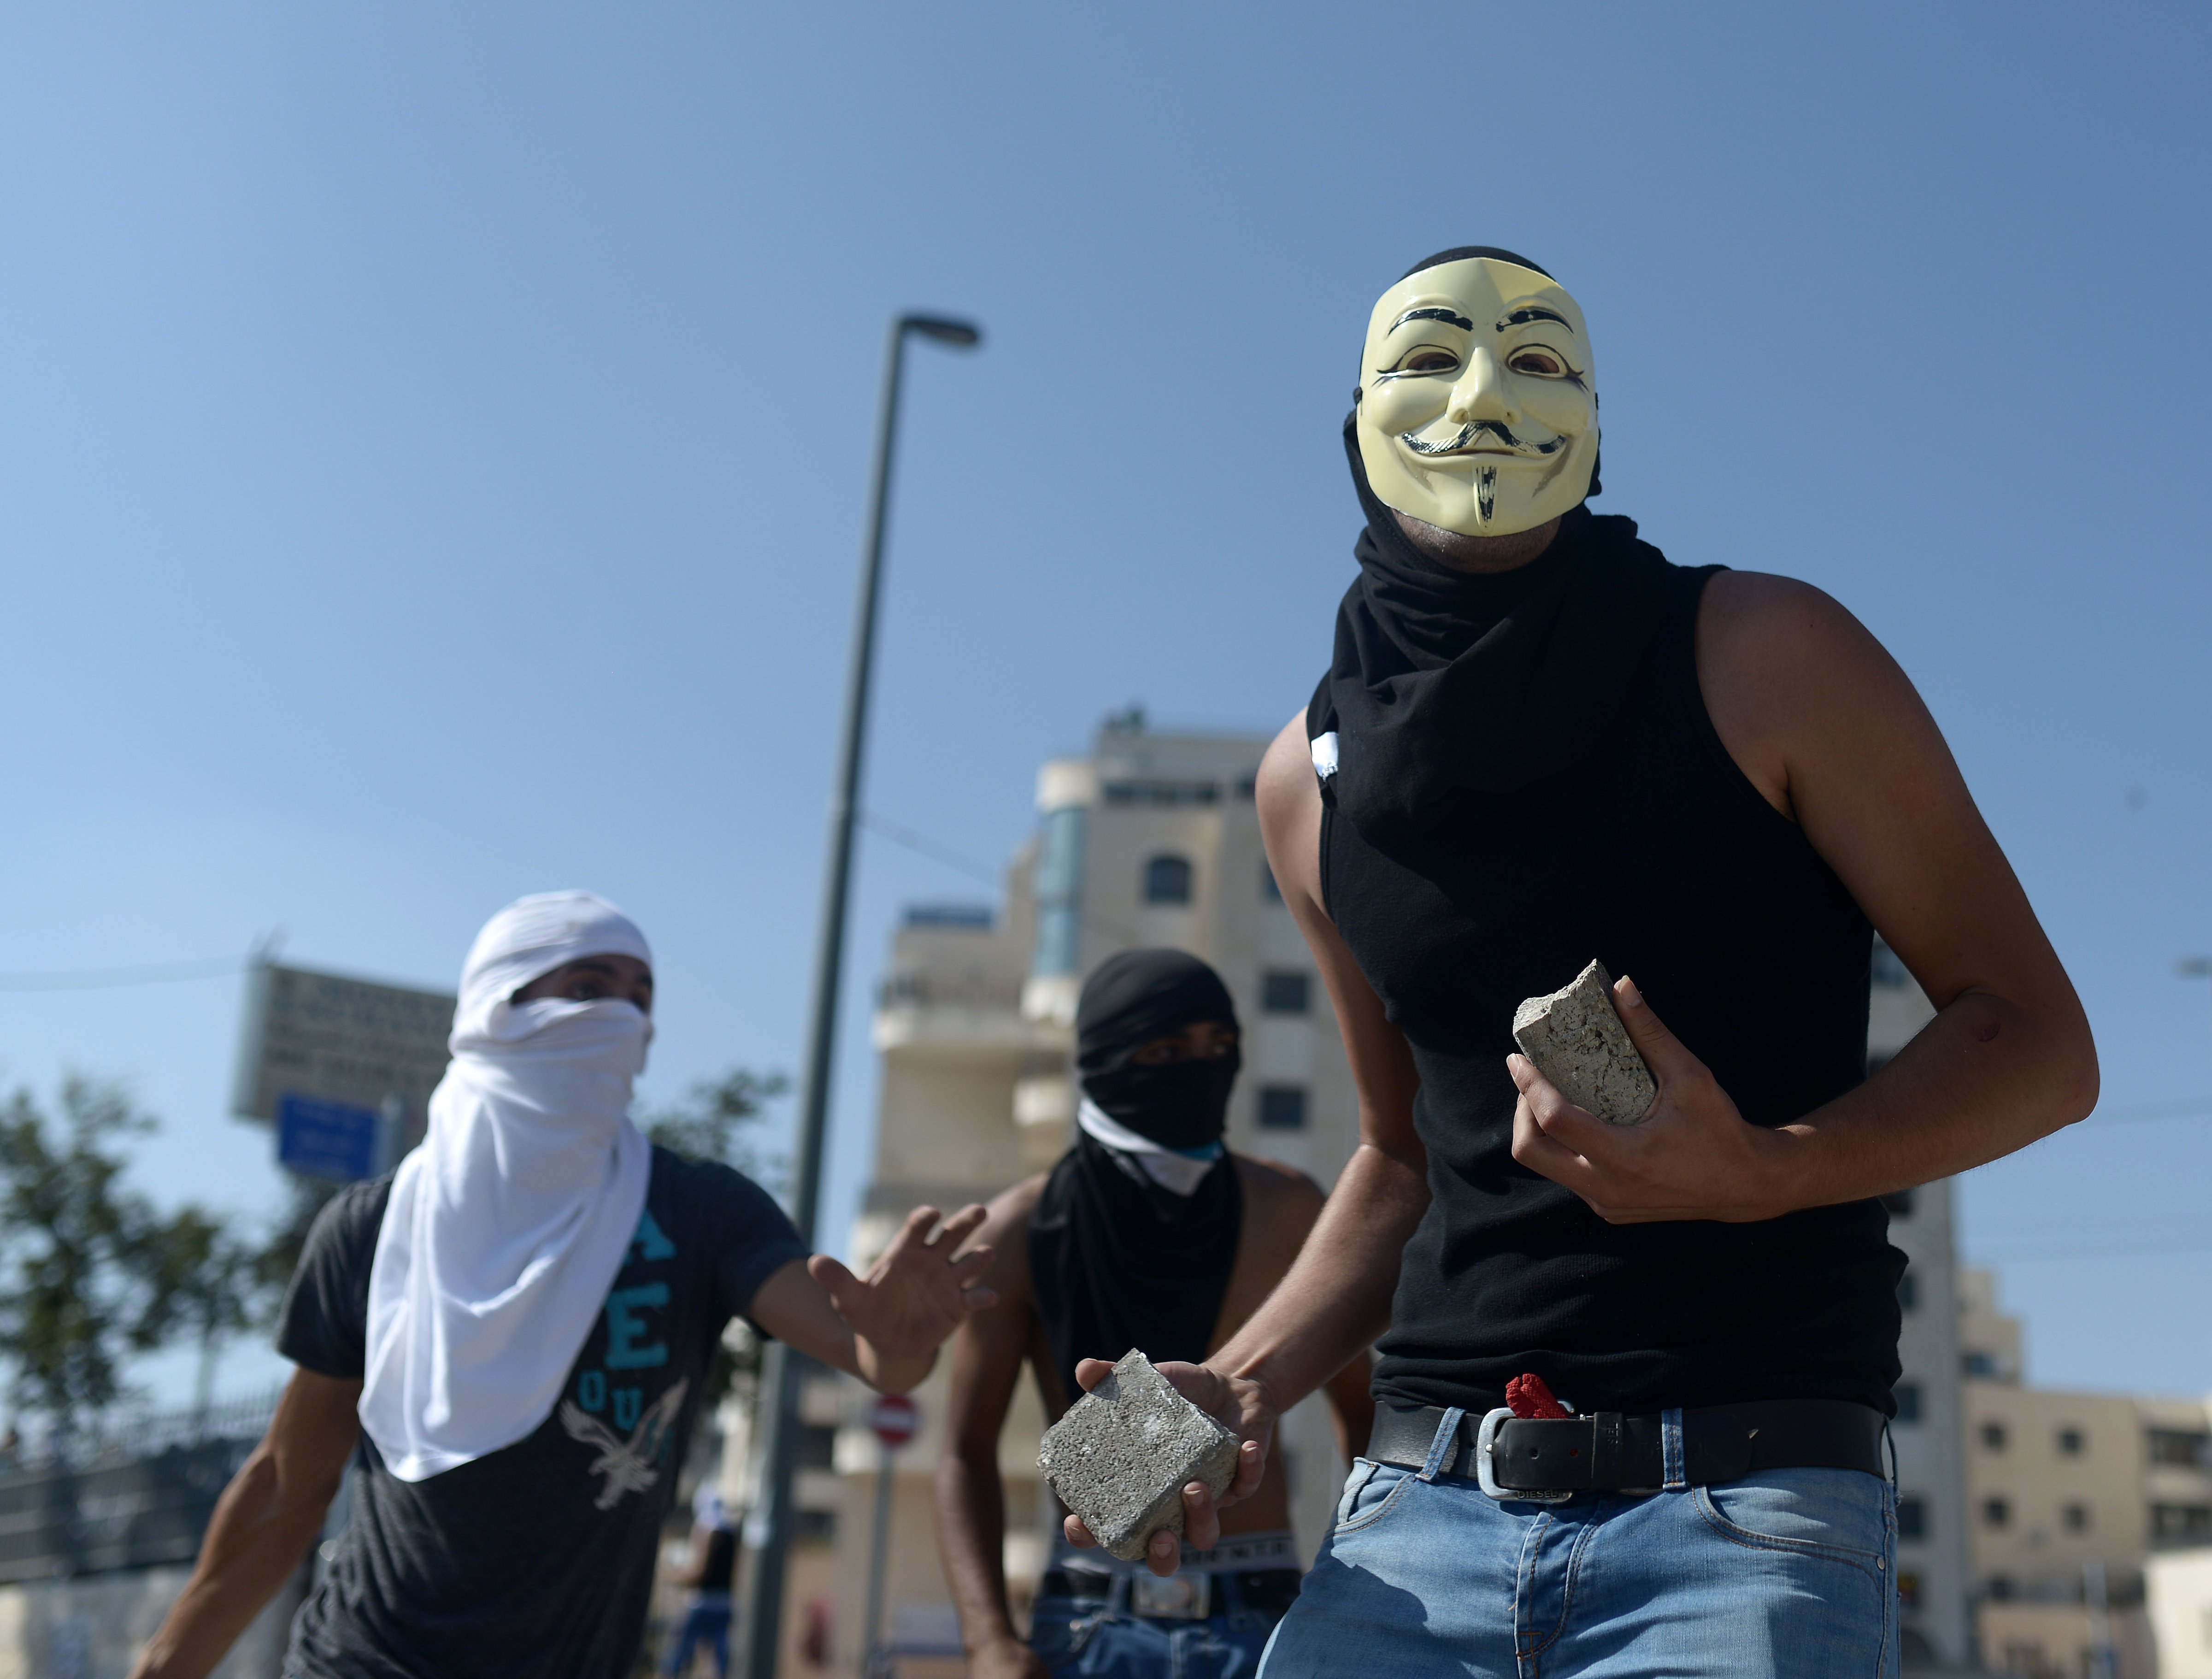 Clashes occurred between Israeli security forces and Palestinian youths during the funeral ceremony held for Muhammad Abu Kdear in Jerusalem on July 4, 2014. (Salih Zeki Fazlioglu—Anadolu Agency/Getty Images)